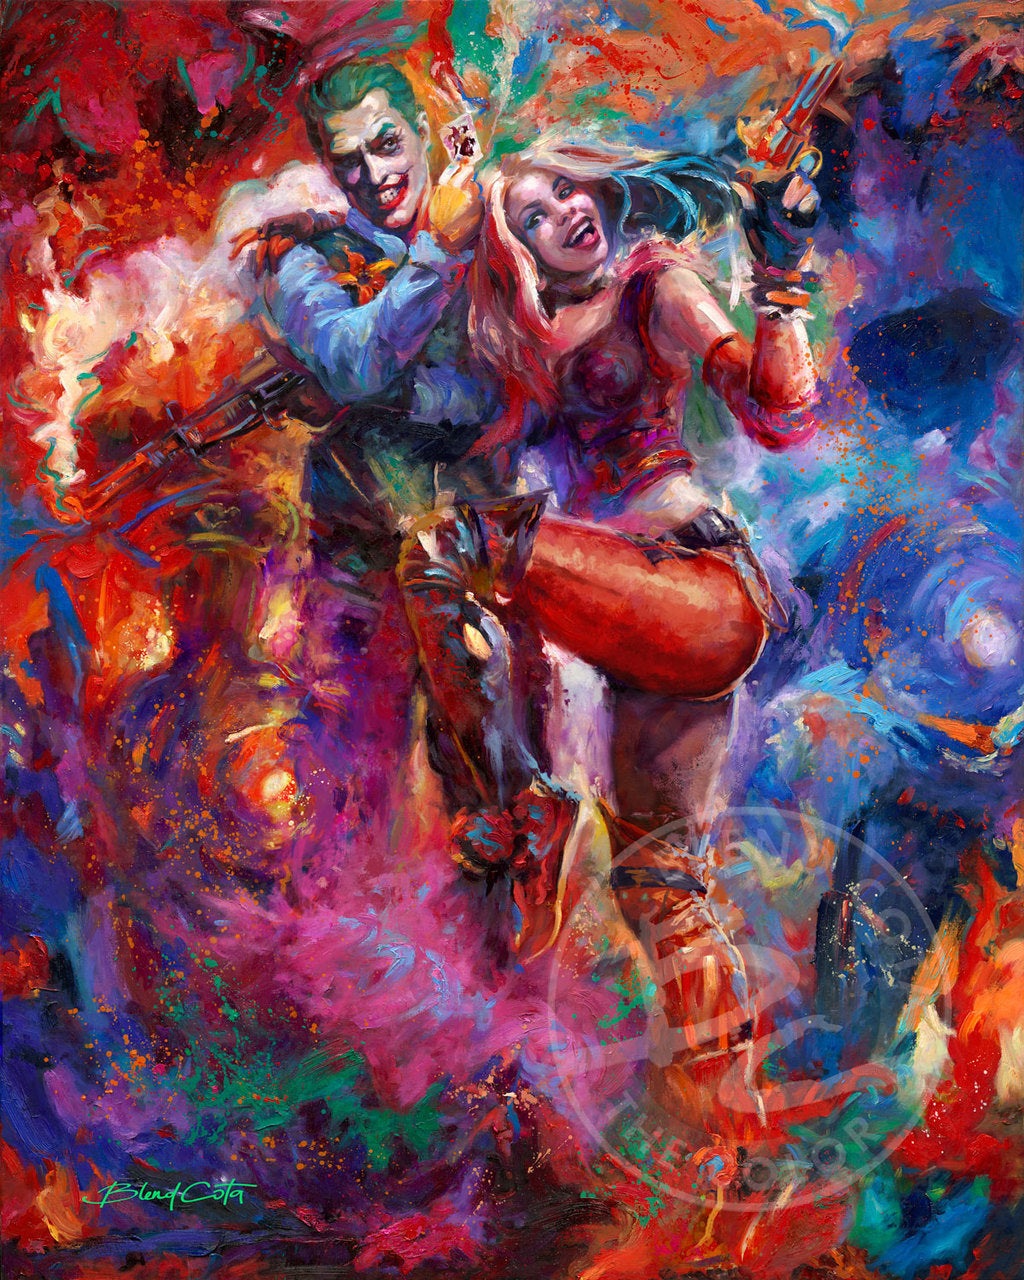 The Joker & Harley Quinn as pair of predators out on a sinister prowl...never miss a dull moment...Limited Edition on Premium Canvas.